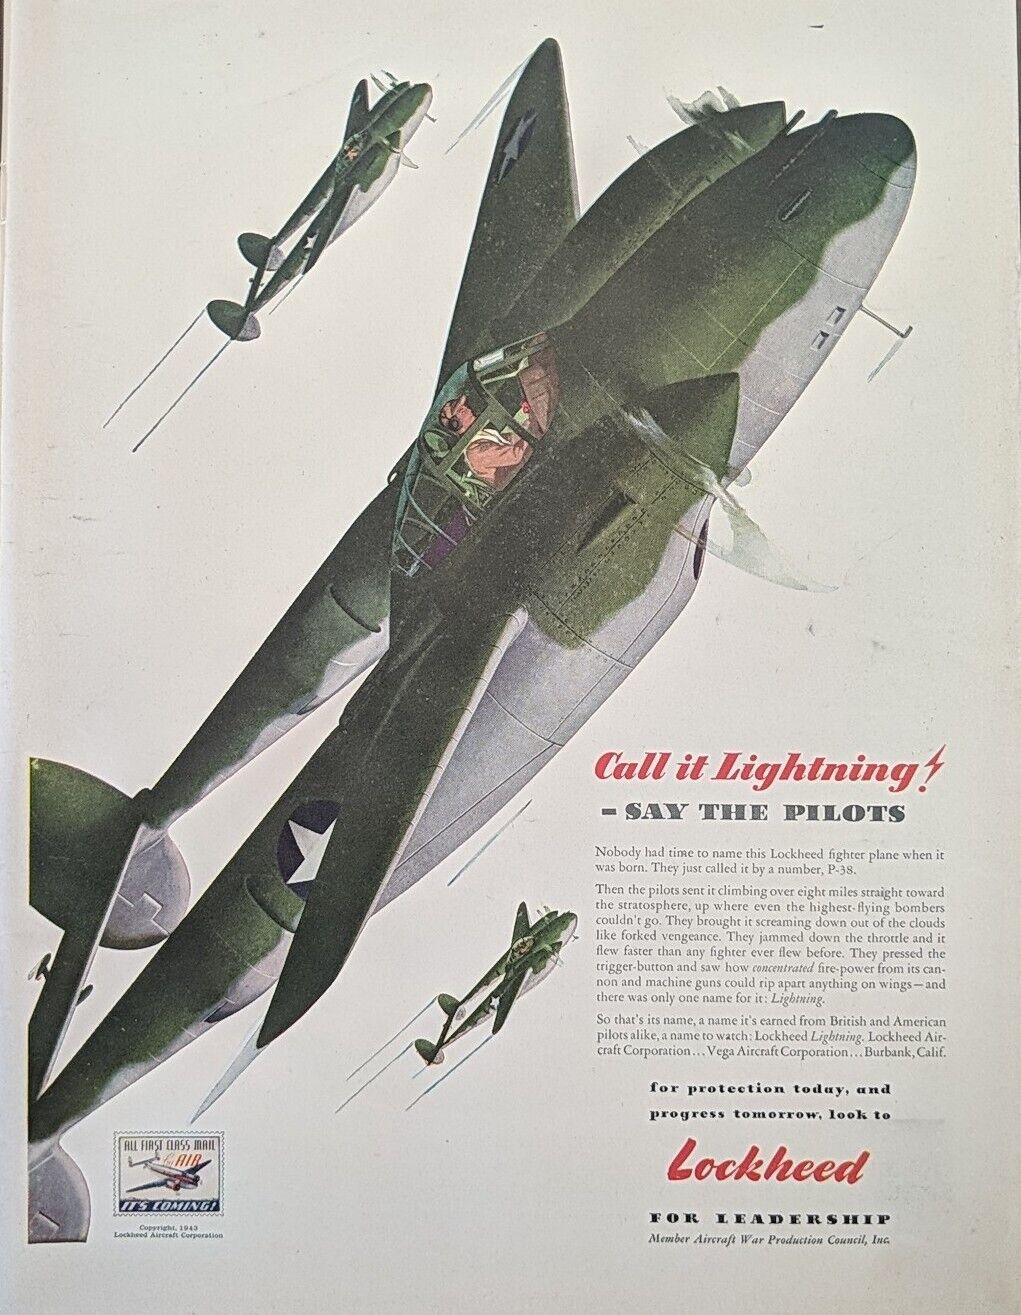 1943 WW2 P-38 Fighter Jet Lockheed Victory Through Airpower Print Ad 